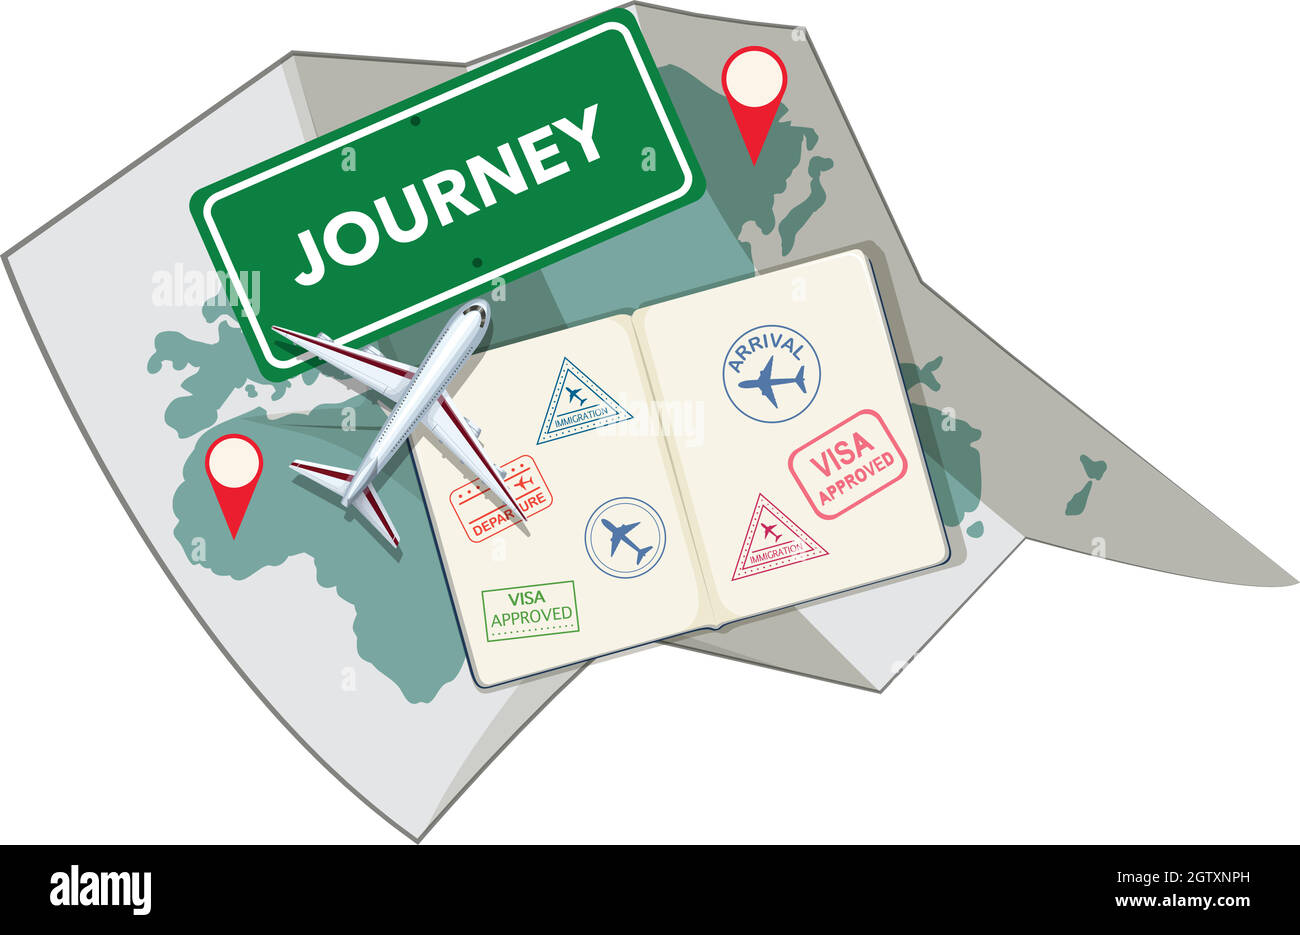 Passport stamp and map Stock Vector